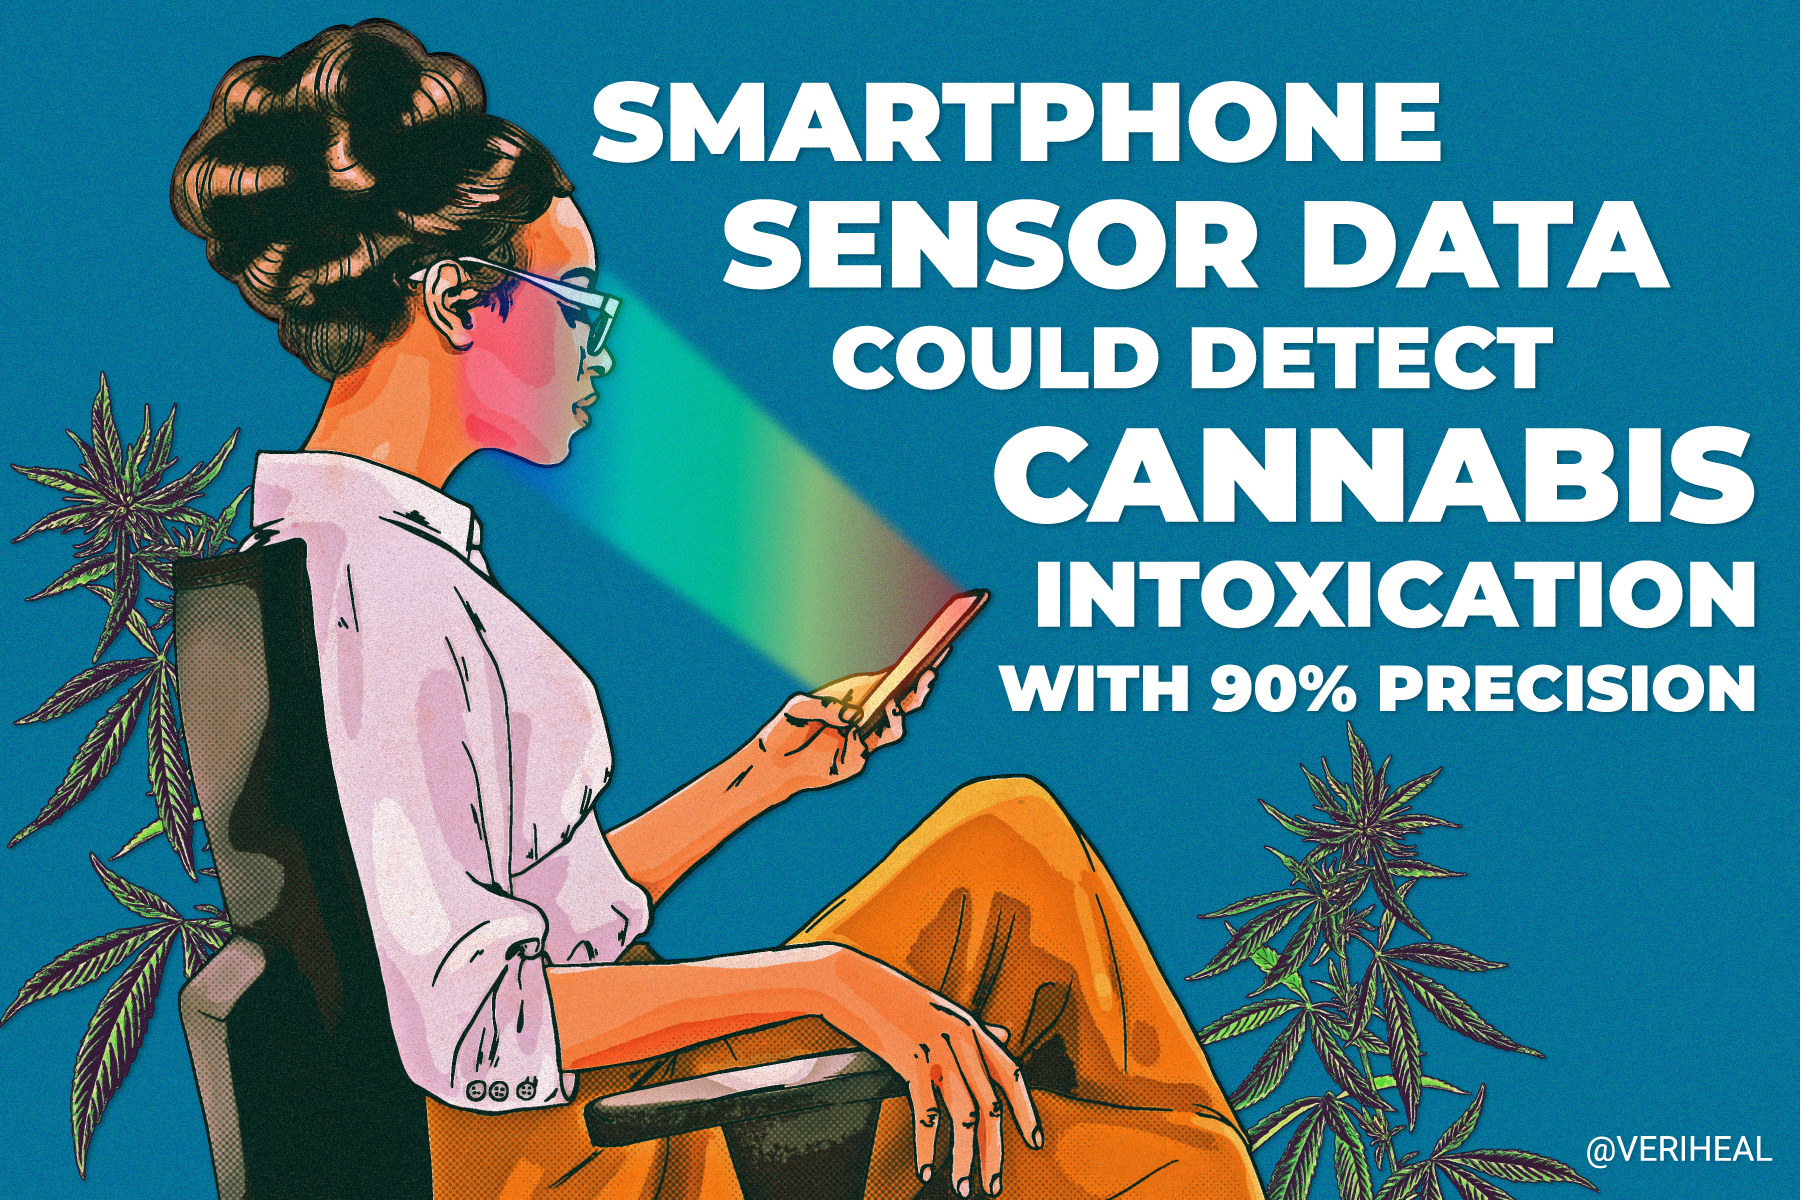 Smartphone Sensor Data Could Detect Cannabis Intoxication With 90% Precision